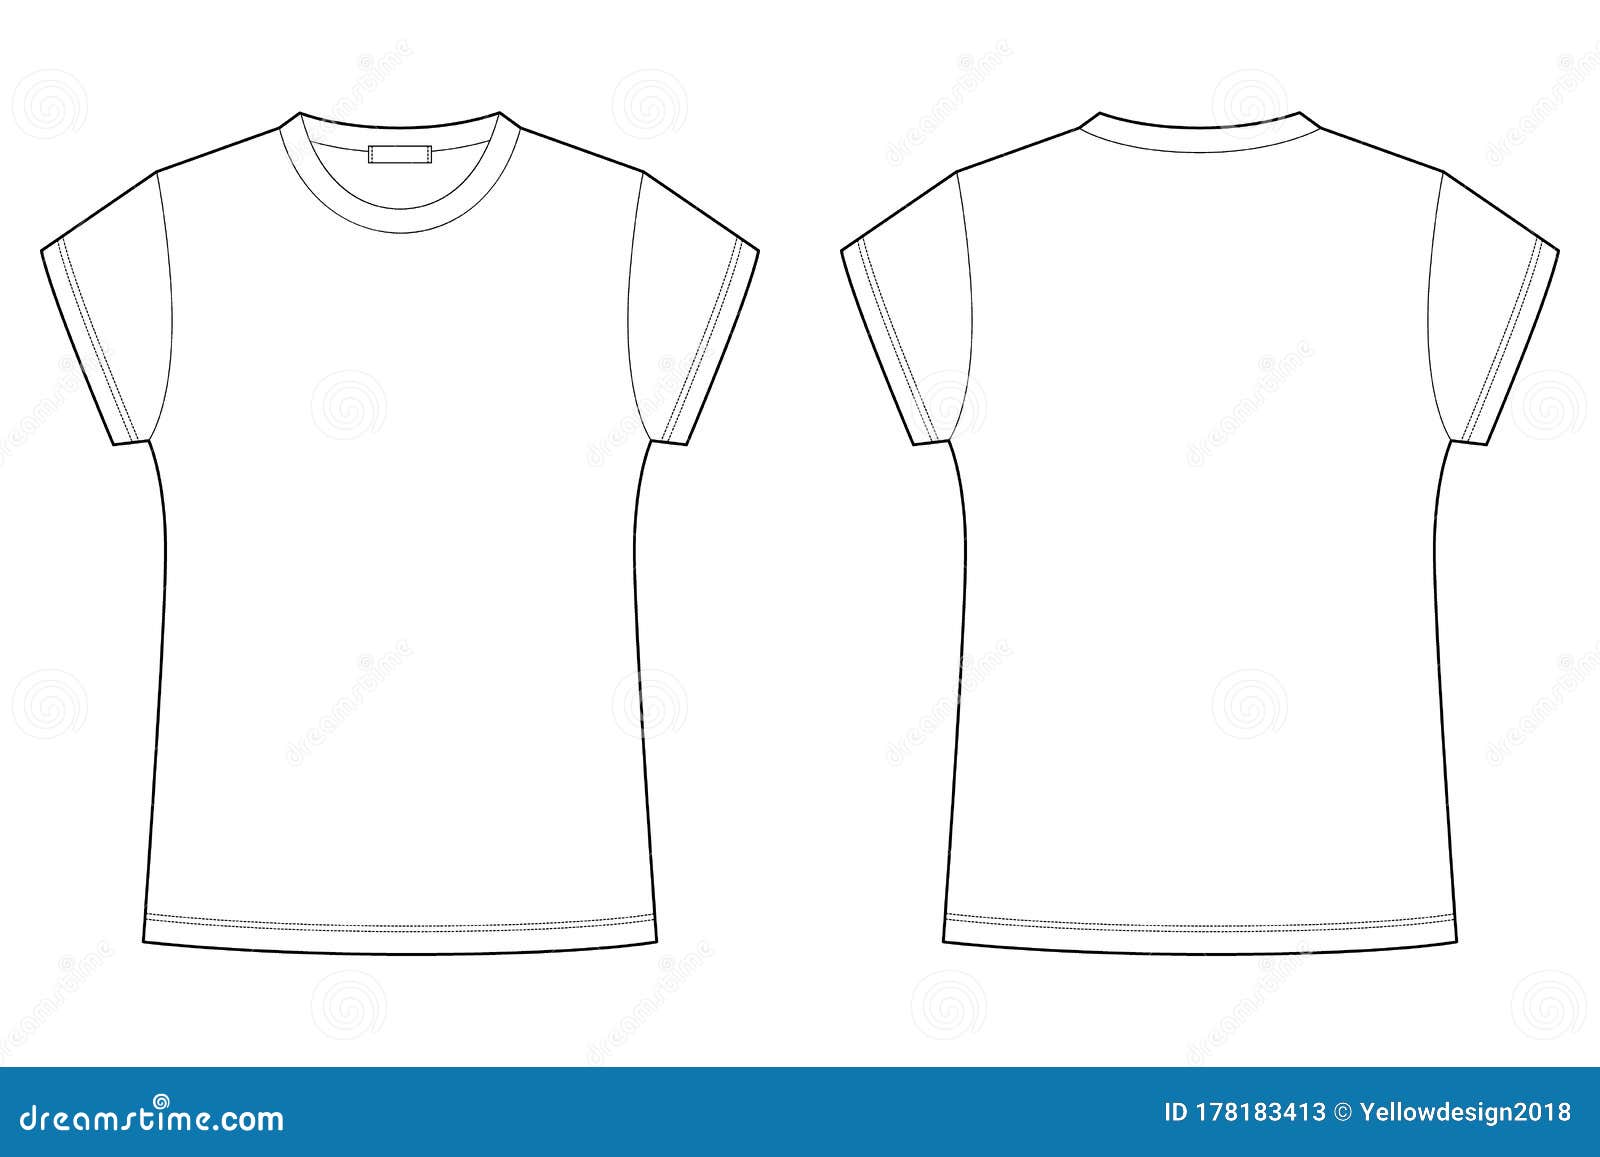 Childrens T-shirt Blank Template Vector Illustration Isolated on White ...